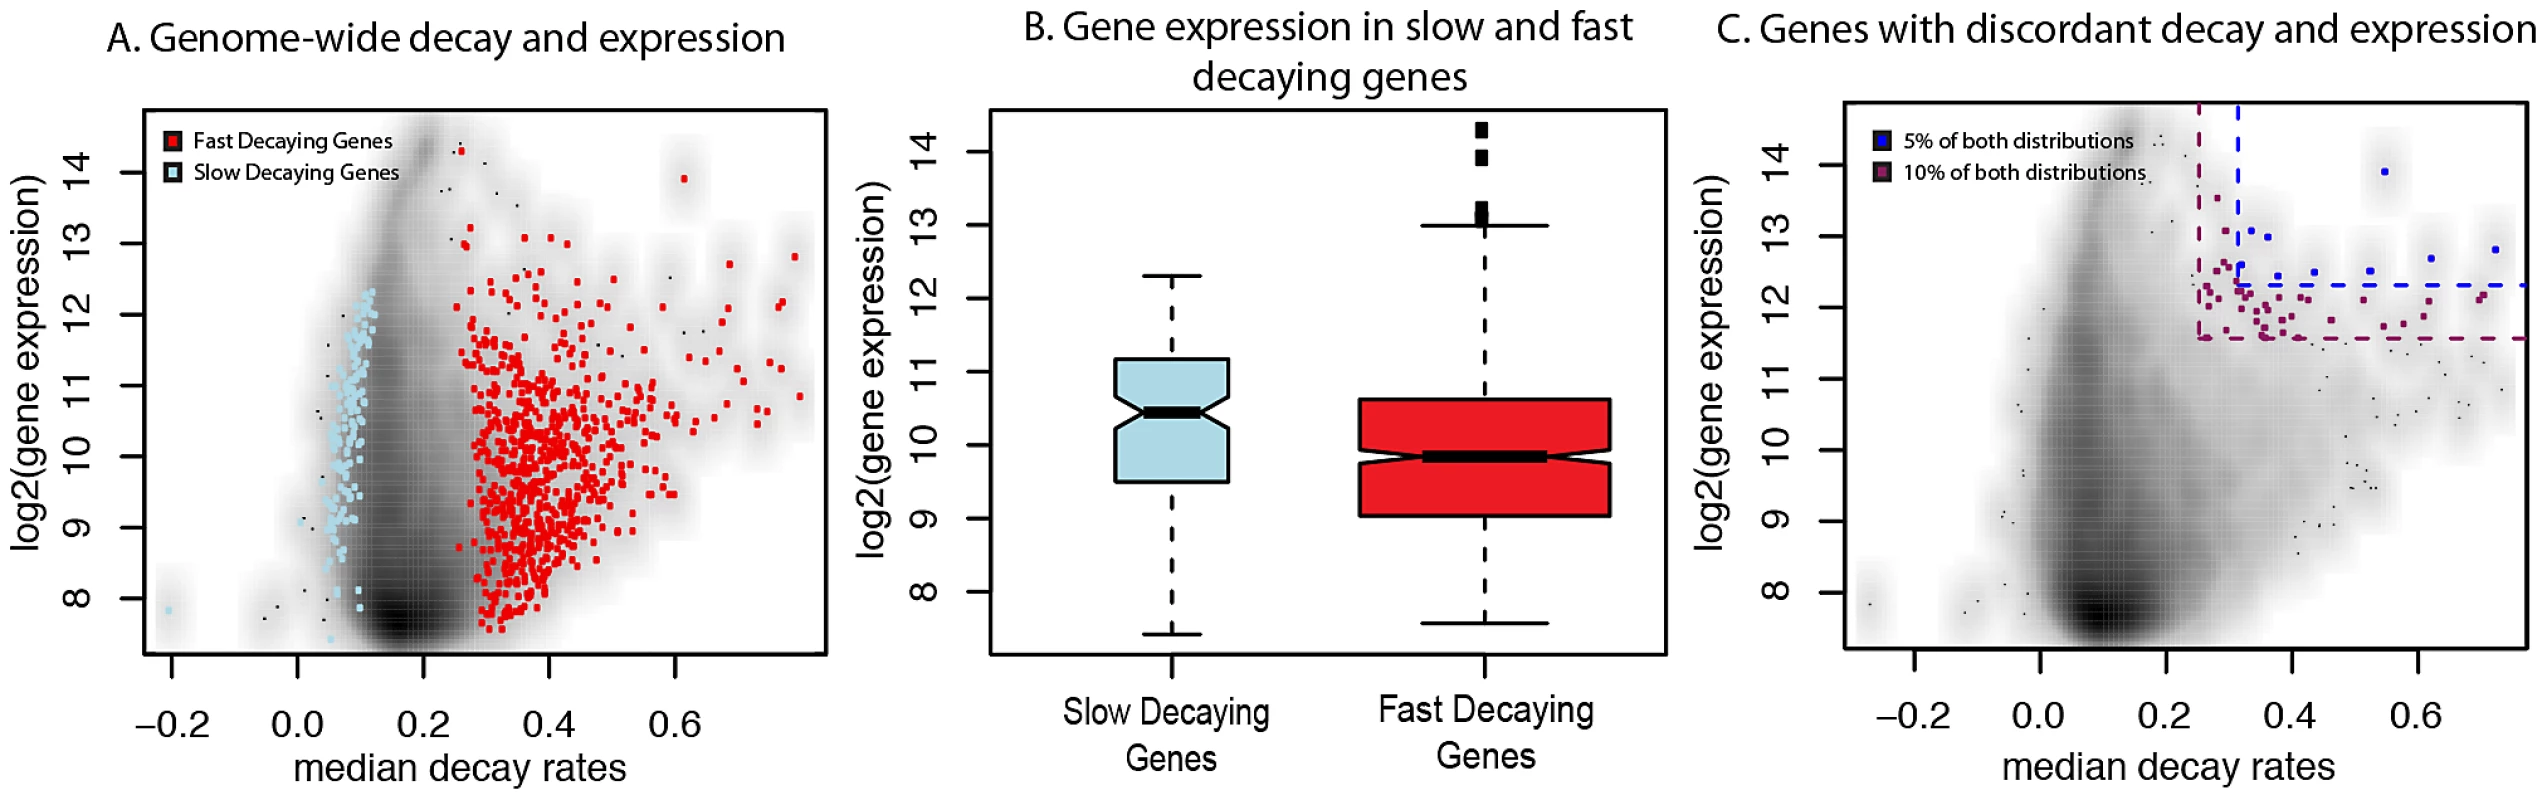 Relationship between gene expression levels and mRNA decay rates across genes.